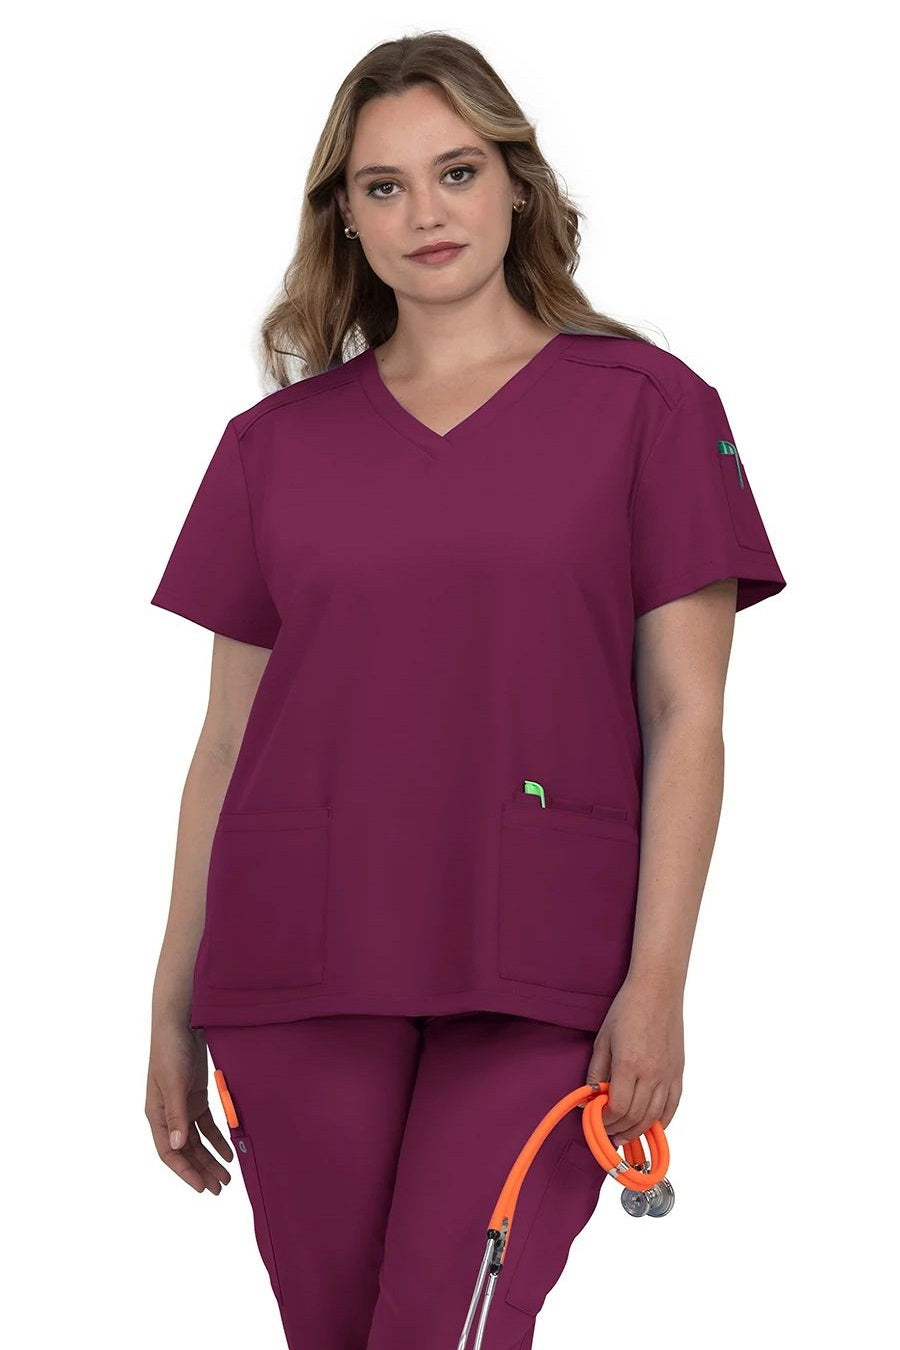 koi Scrub Top Cureology Cardi in Wine at Parker's Clothing and Shoes.